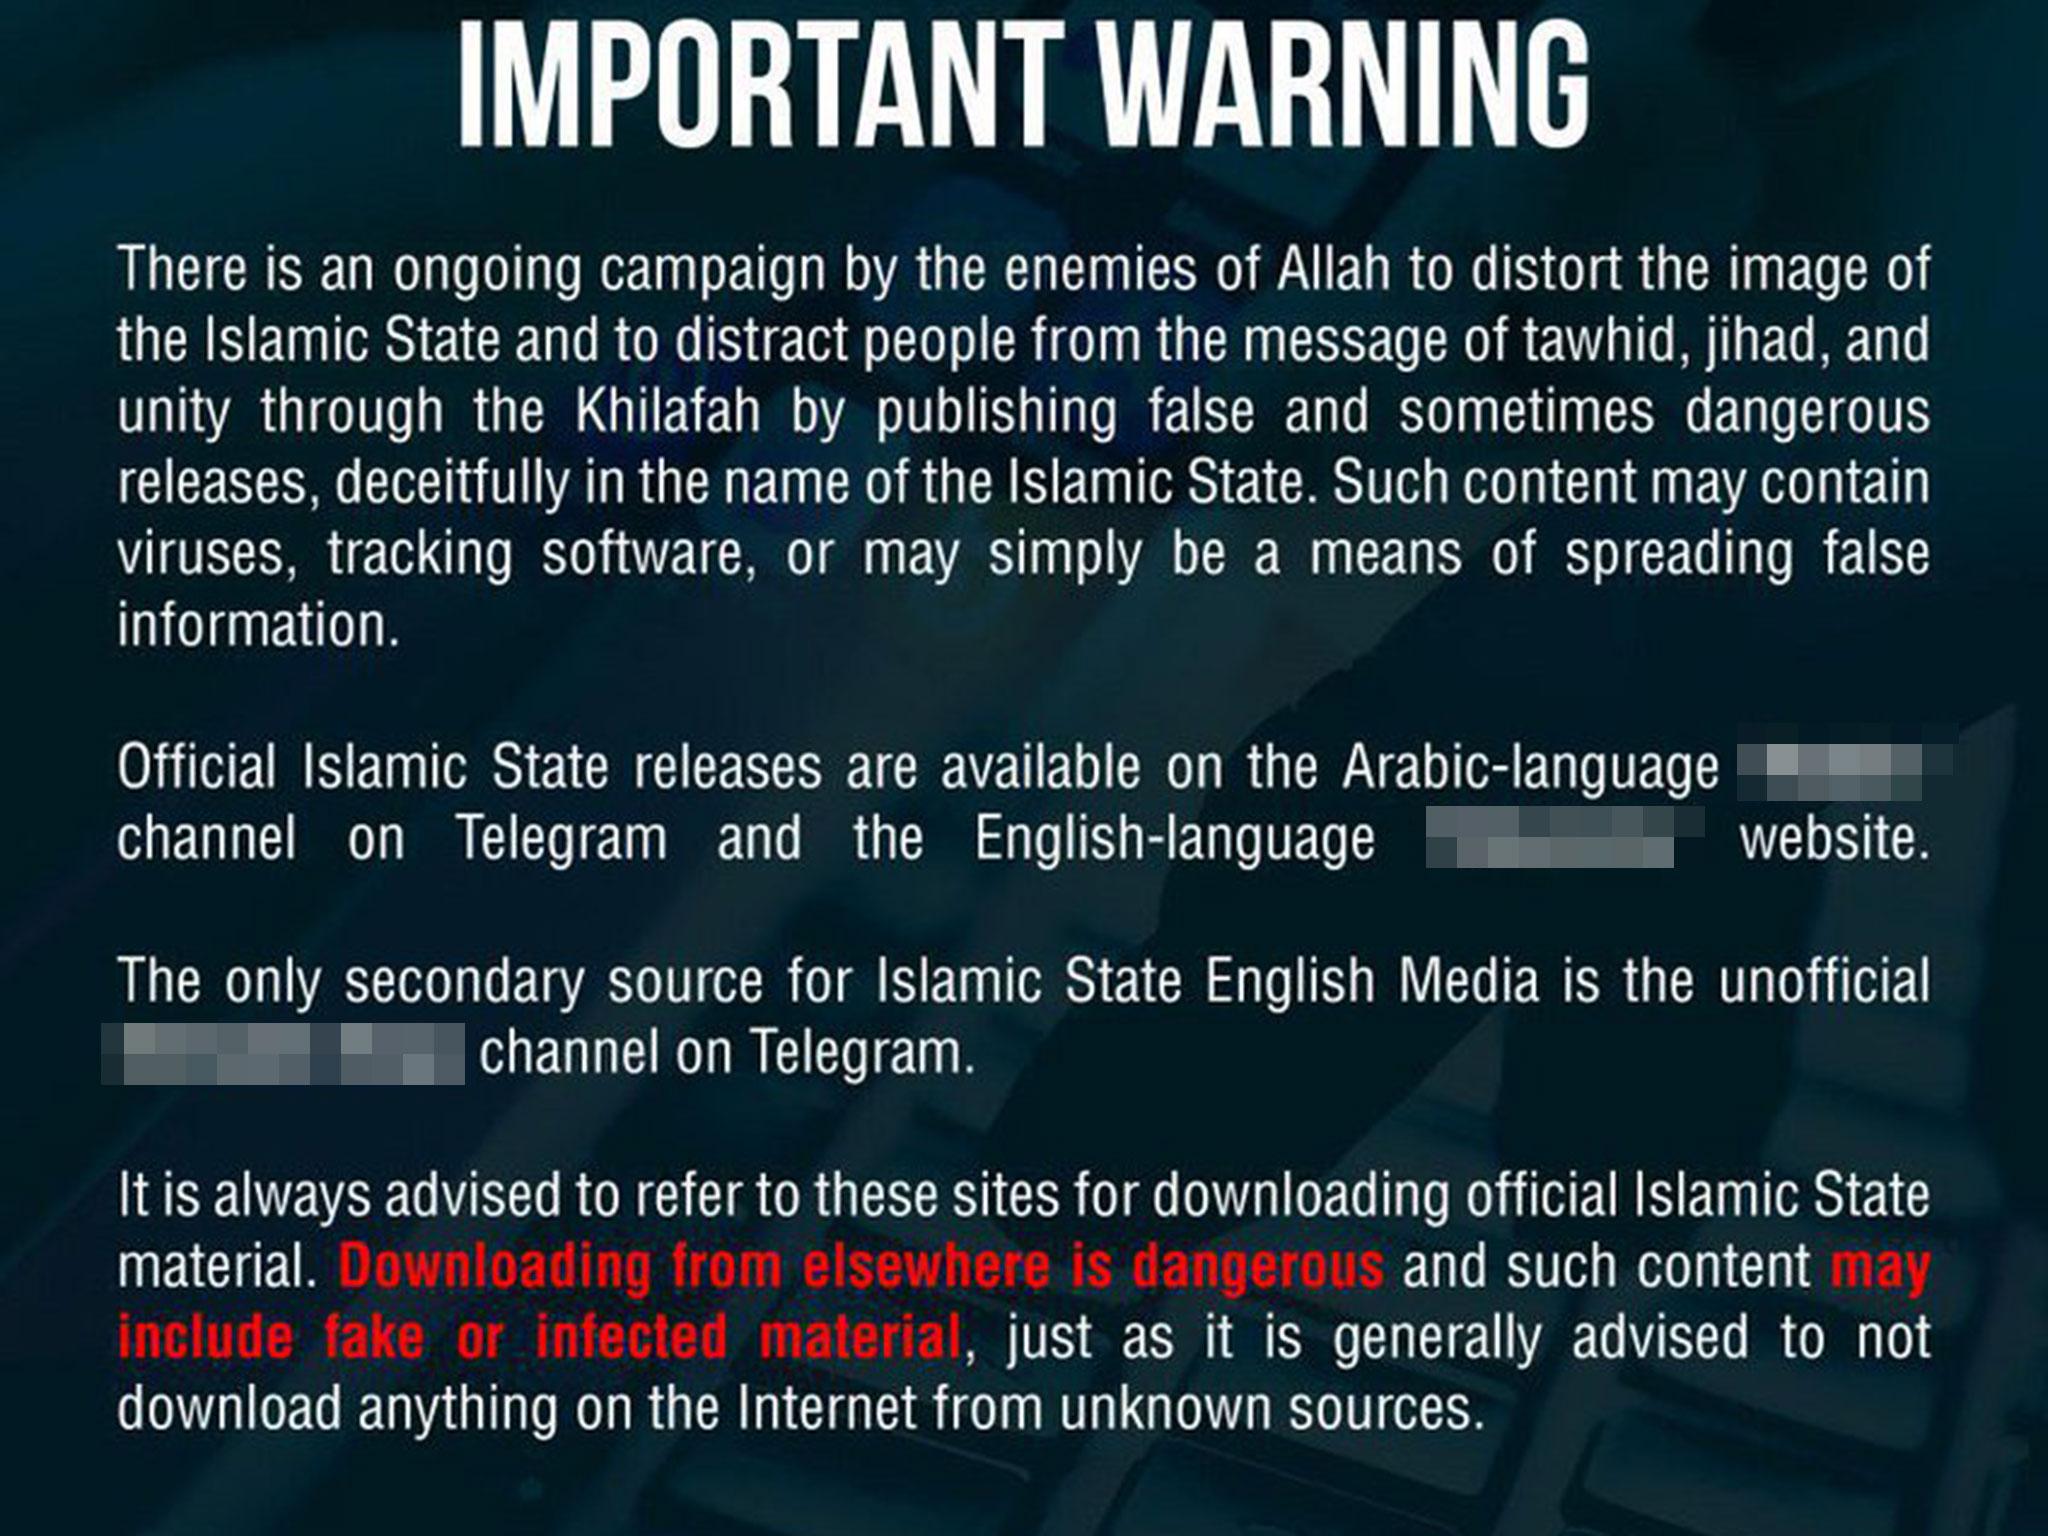 Isis was forced to release a warning to followers over 'false and sometimes dangerous' content